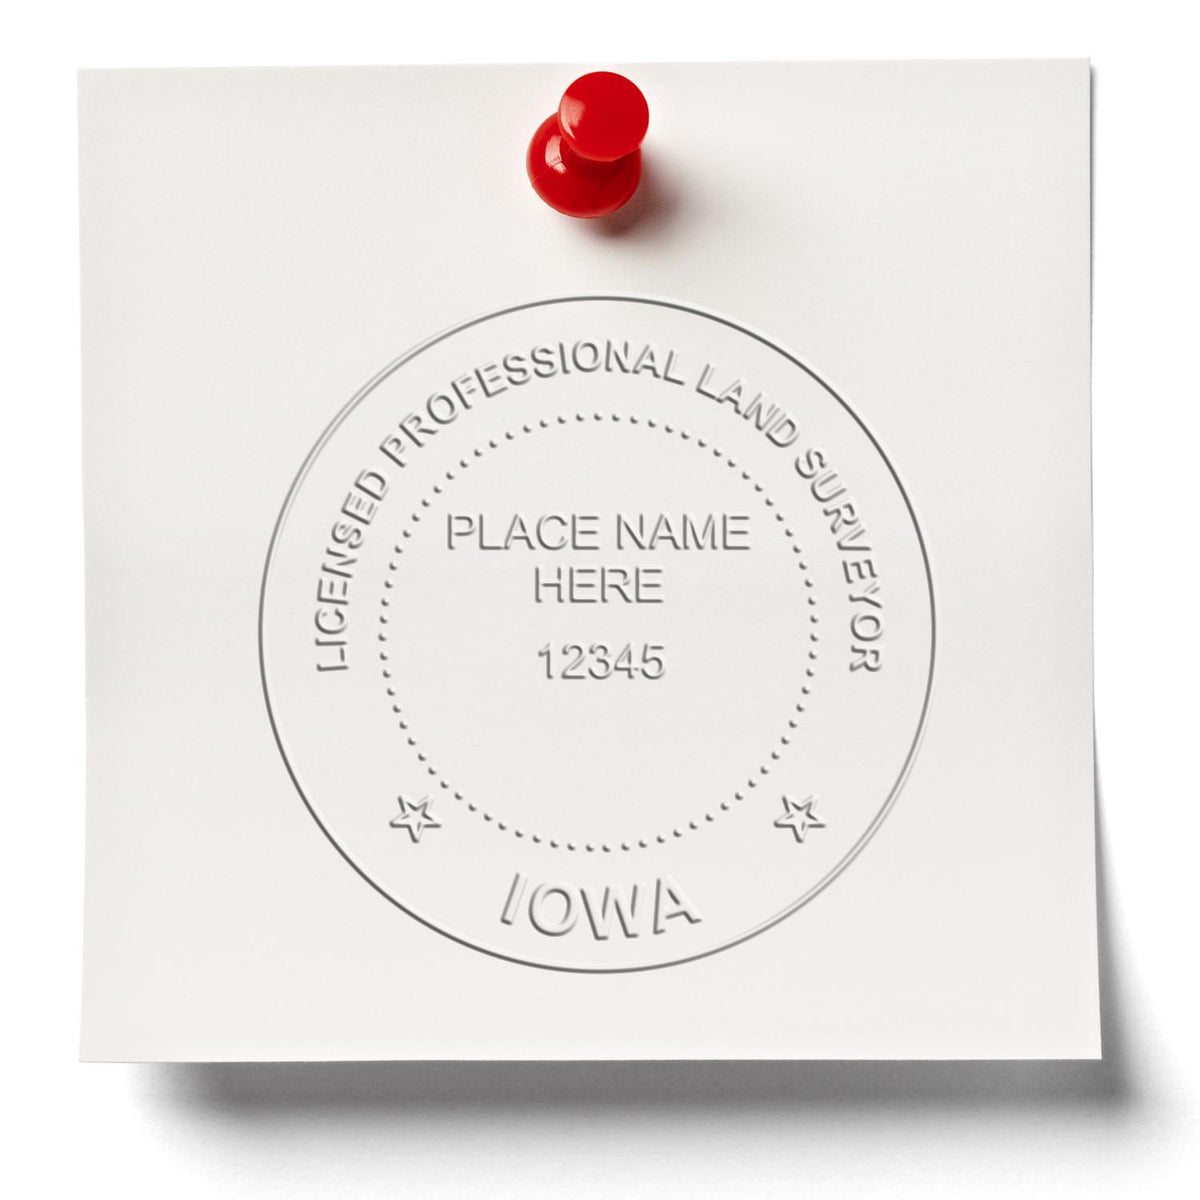 A stamped imprint of the Gift Iowa Land Surveyor Seal in this stylish lifestyle photo, setting the tone for a unique and personalized product.